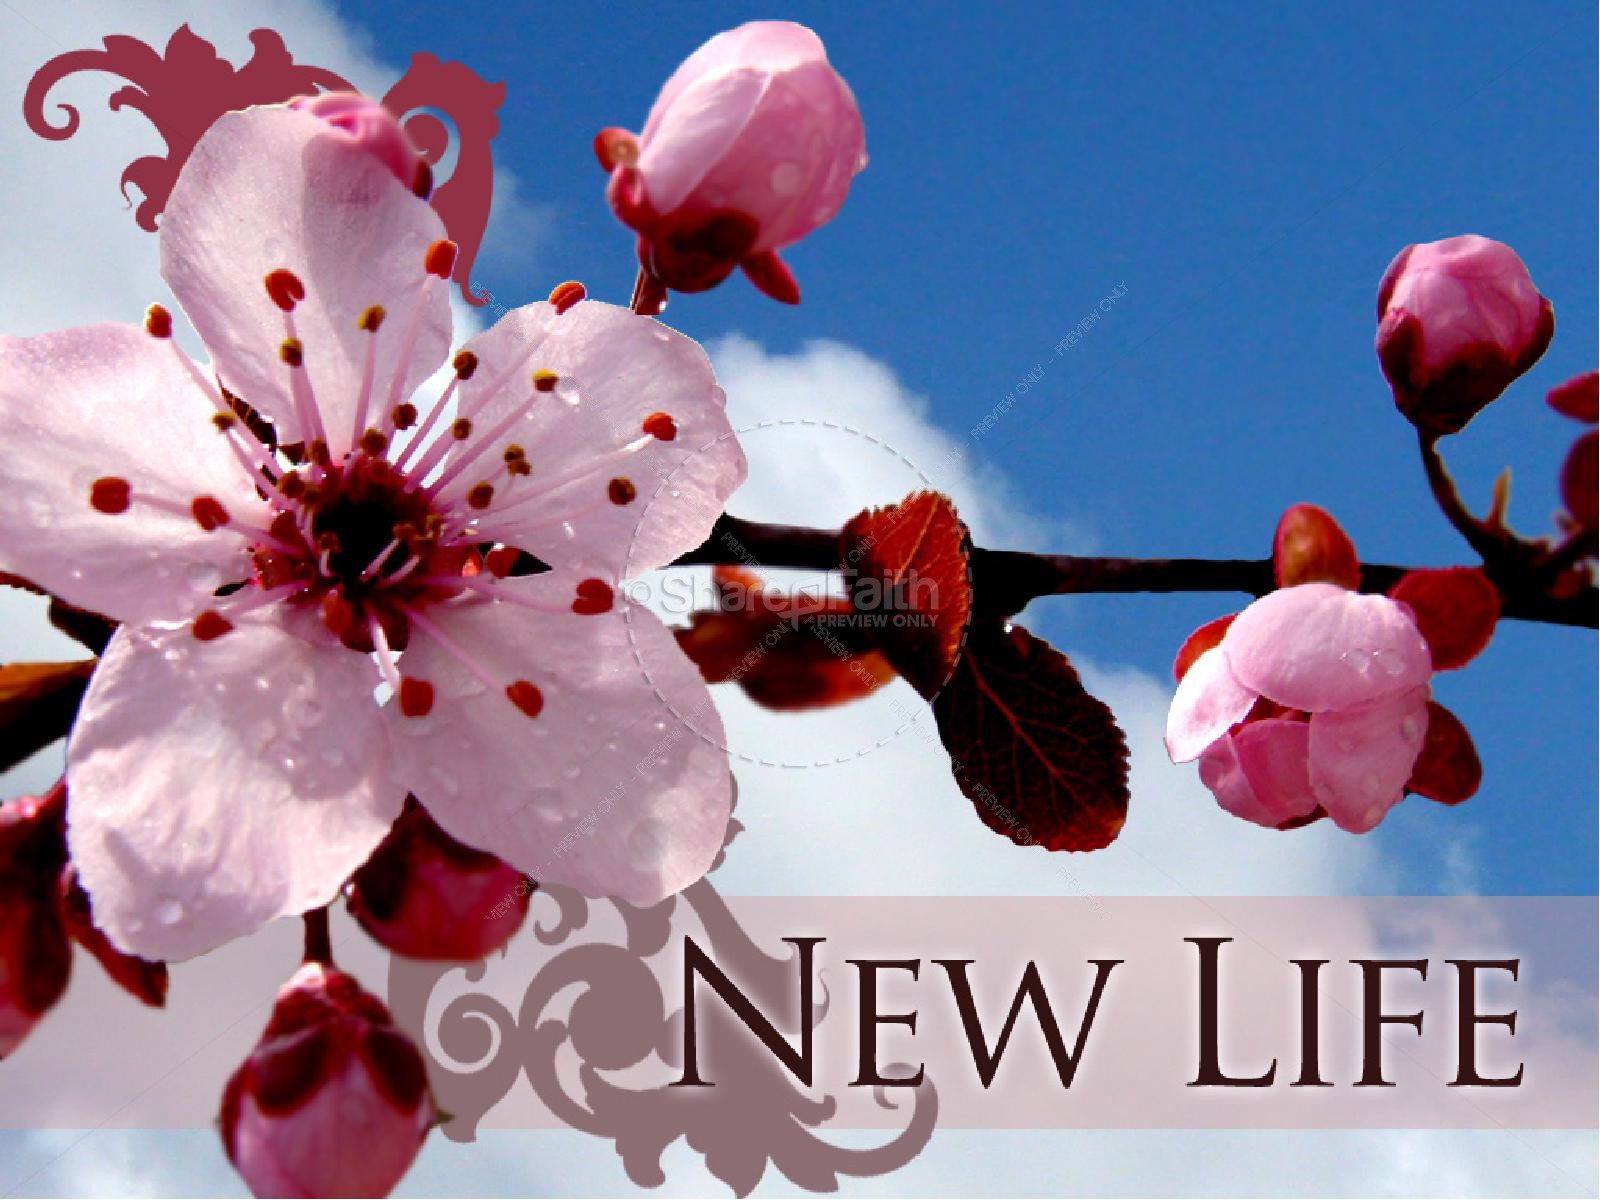 New Life with Blossoms